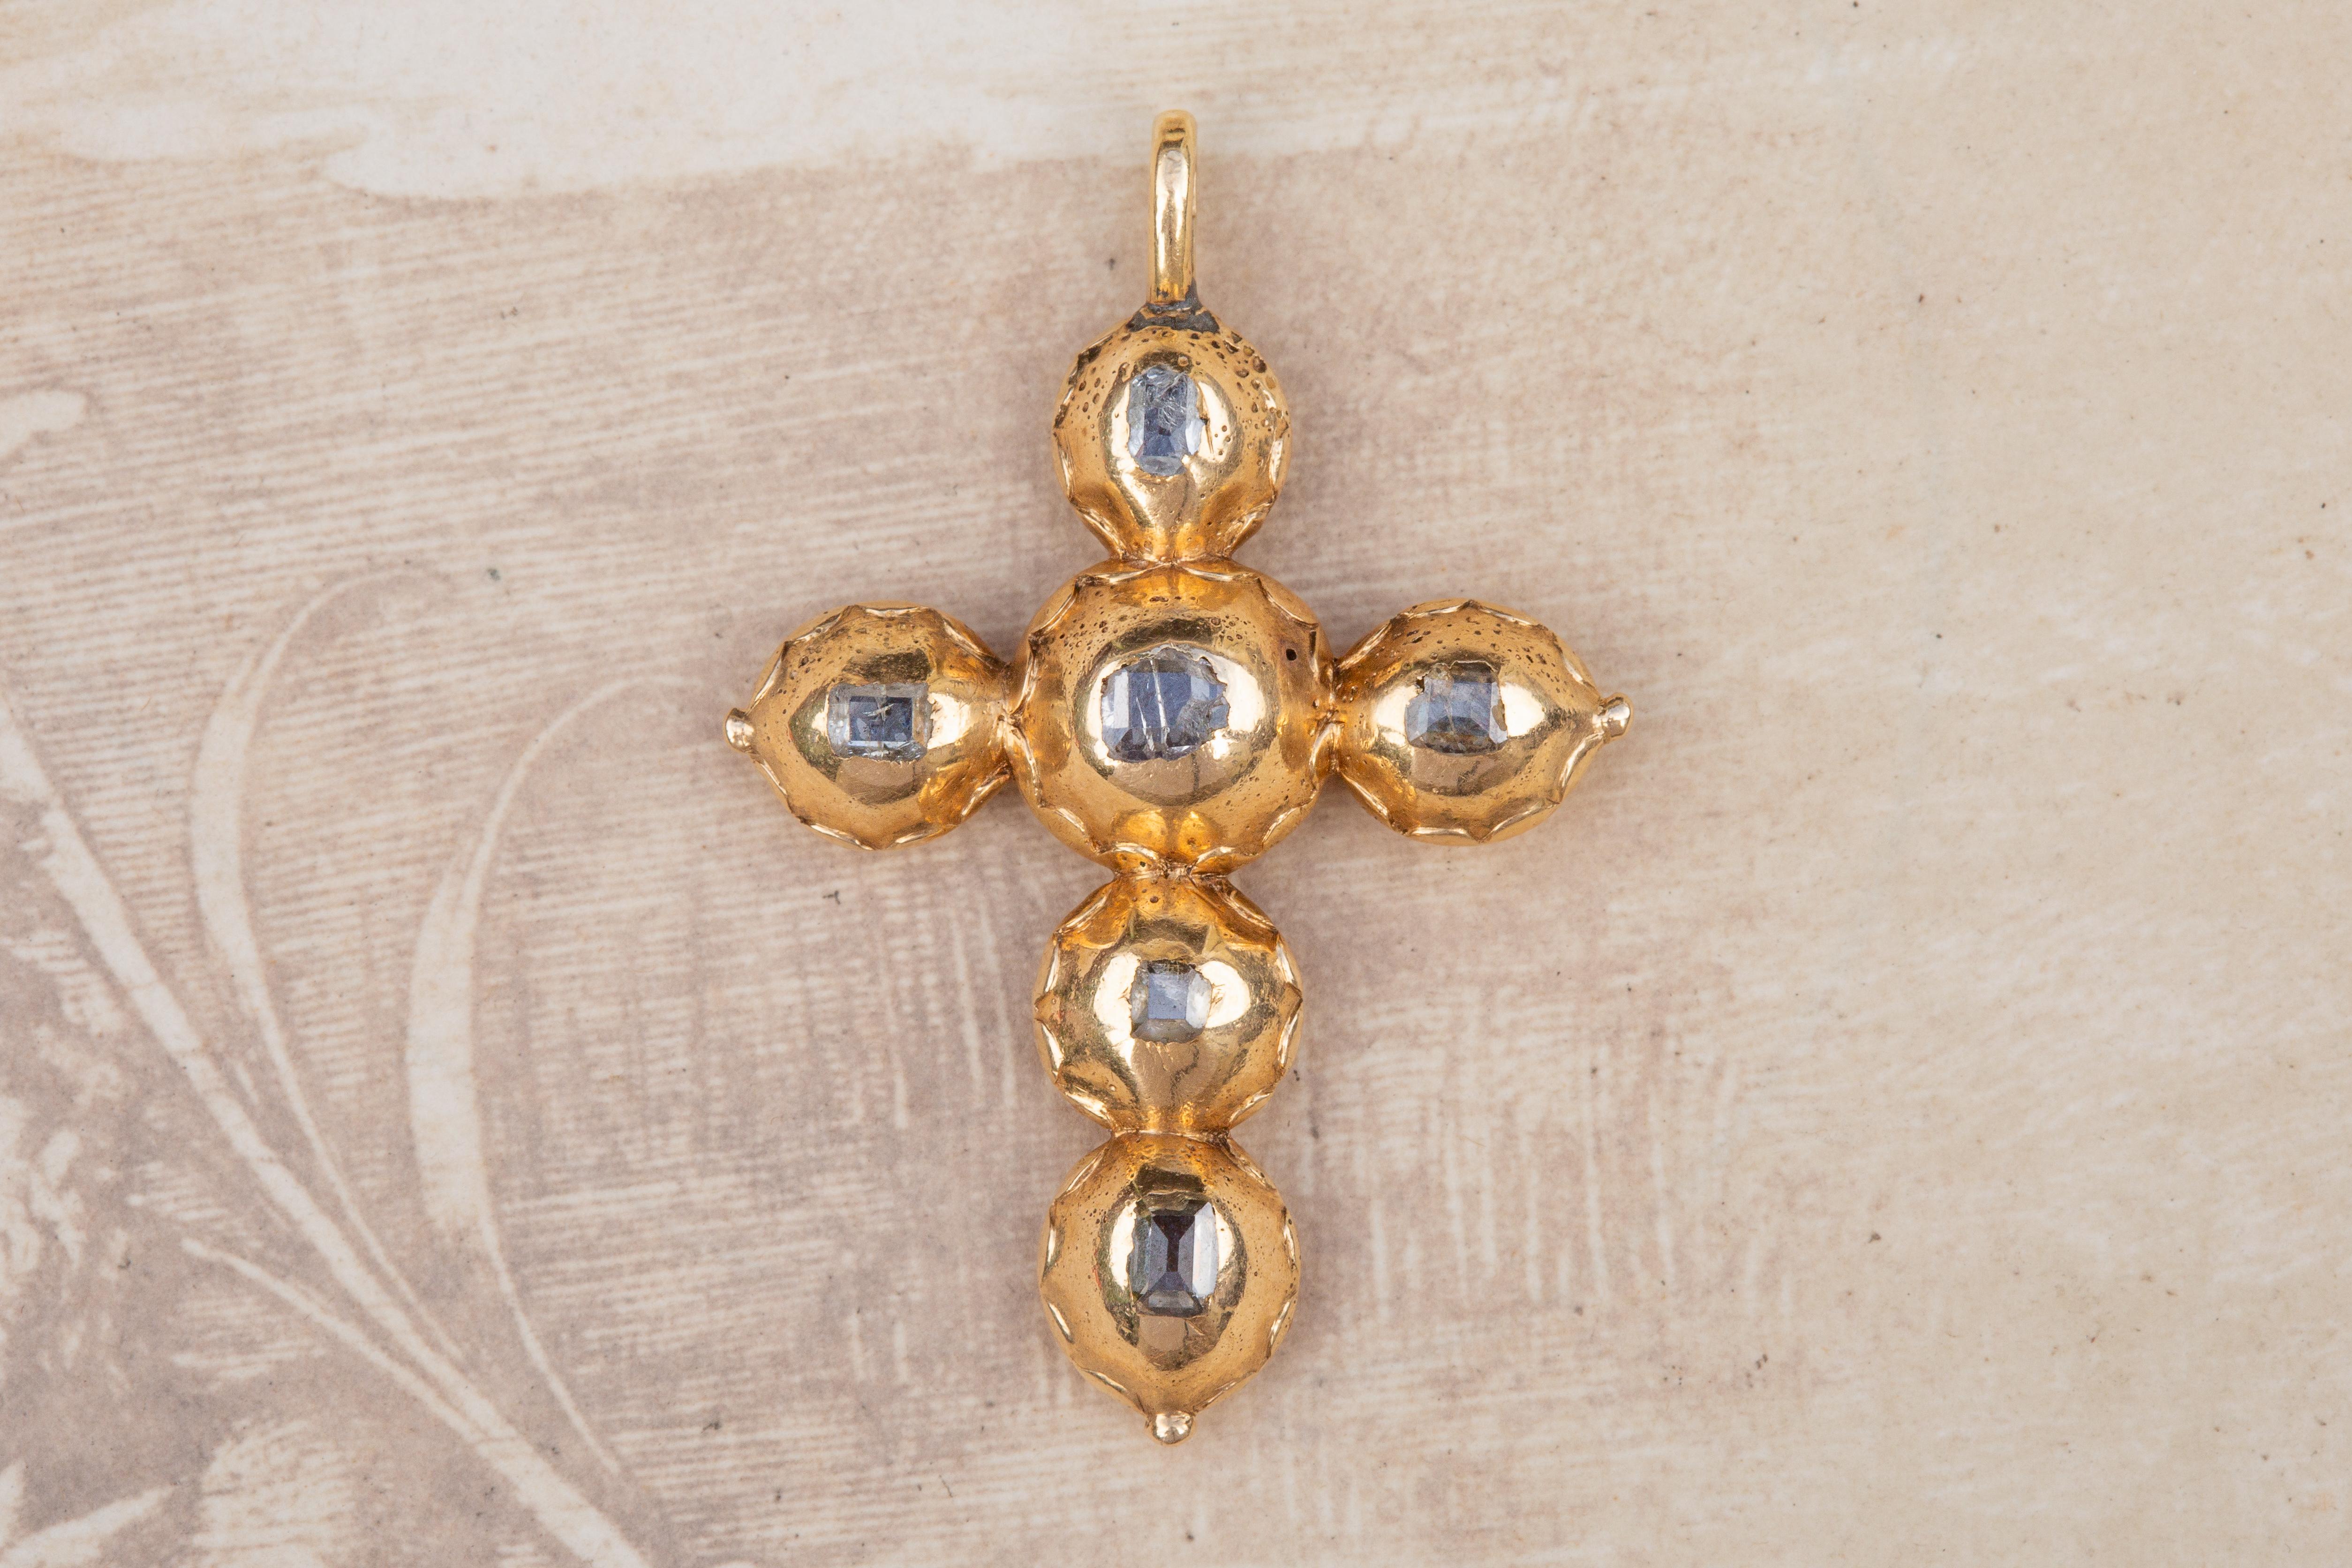 A scarce early 18th century Baroque table cut diamond cross pendant, circa 1700-1720 and probably Western Europe (Netherlands or Flanders). 

The cross is crafted in 14K yellow gold, and set with six table cut diamonds. Each of the diamonds are